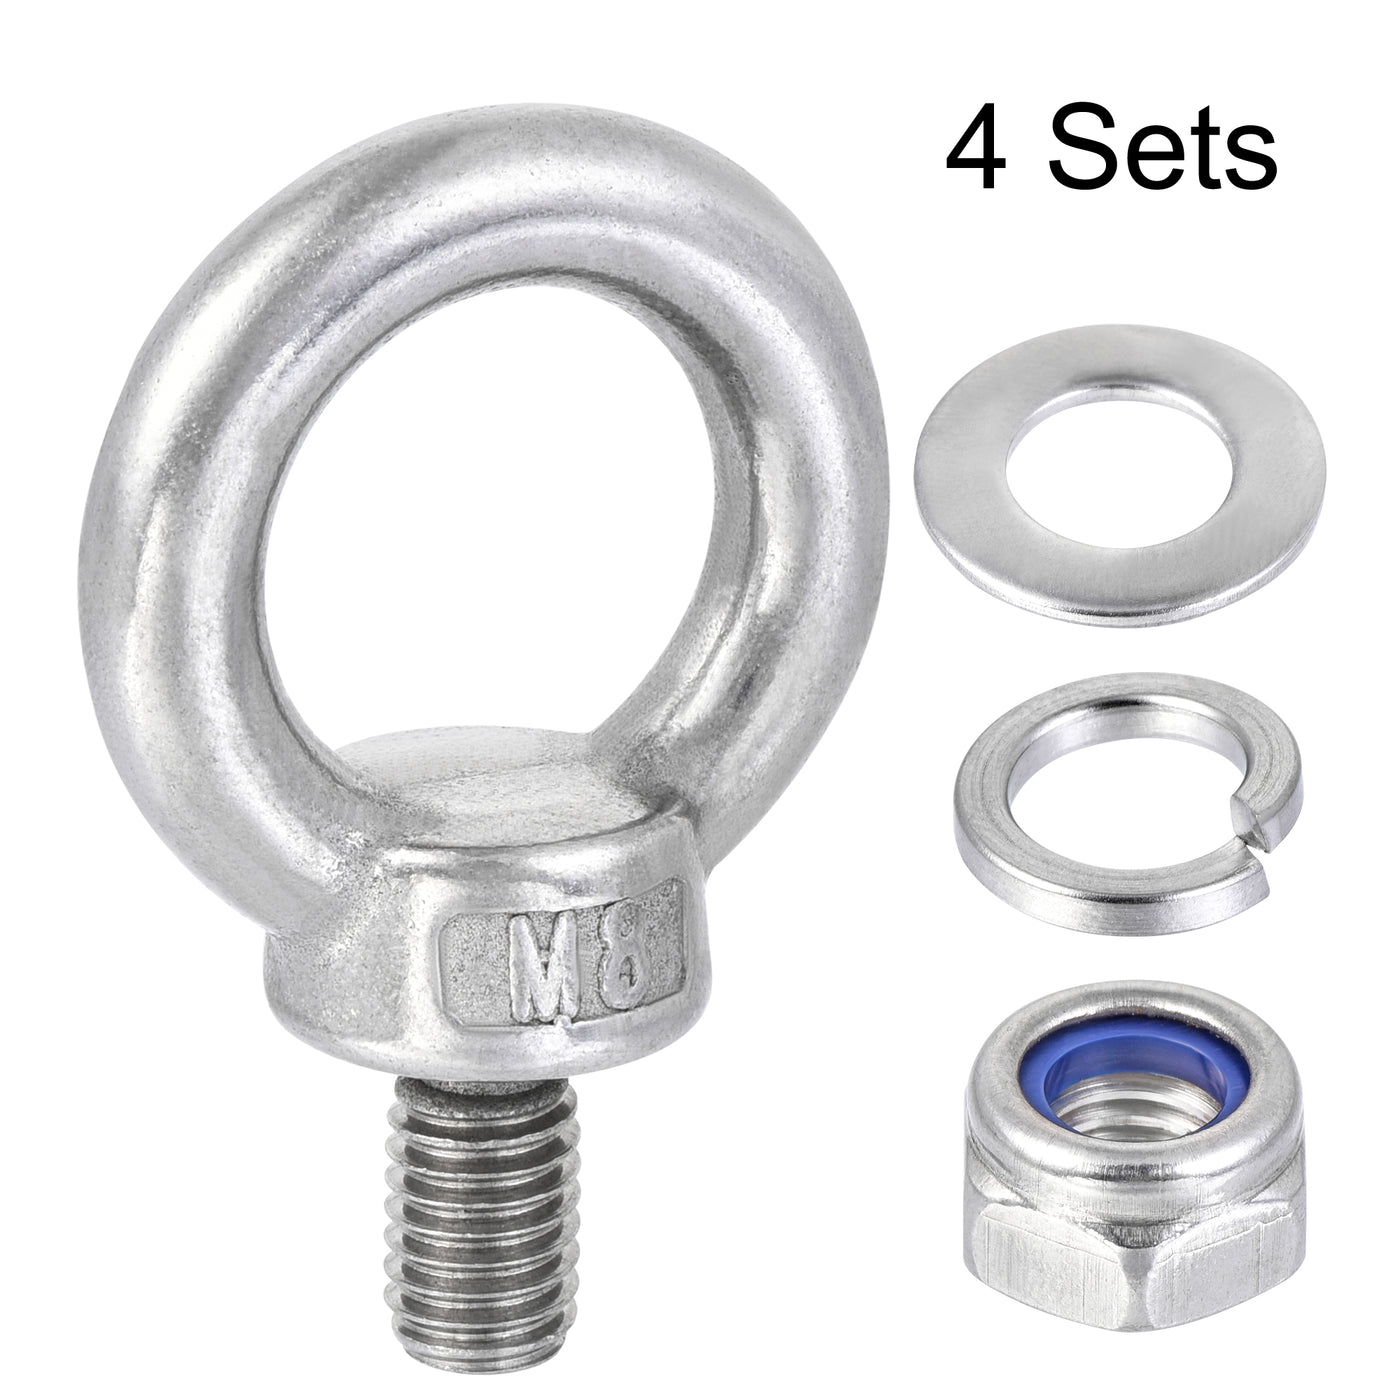 uxcell Uxcell Lifting Eye Bolt M8 x 14mm Male Thread with Hex Screw Nut Gasket Flat Washer for Hanging, 304 Stainless Steel, 4 Sets